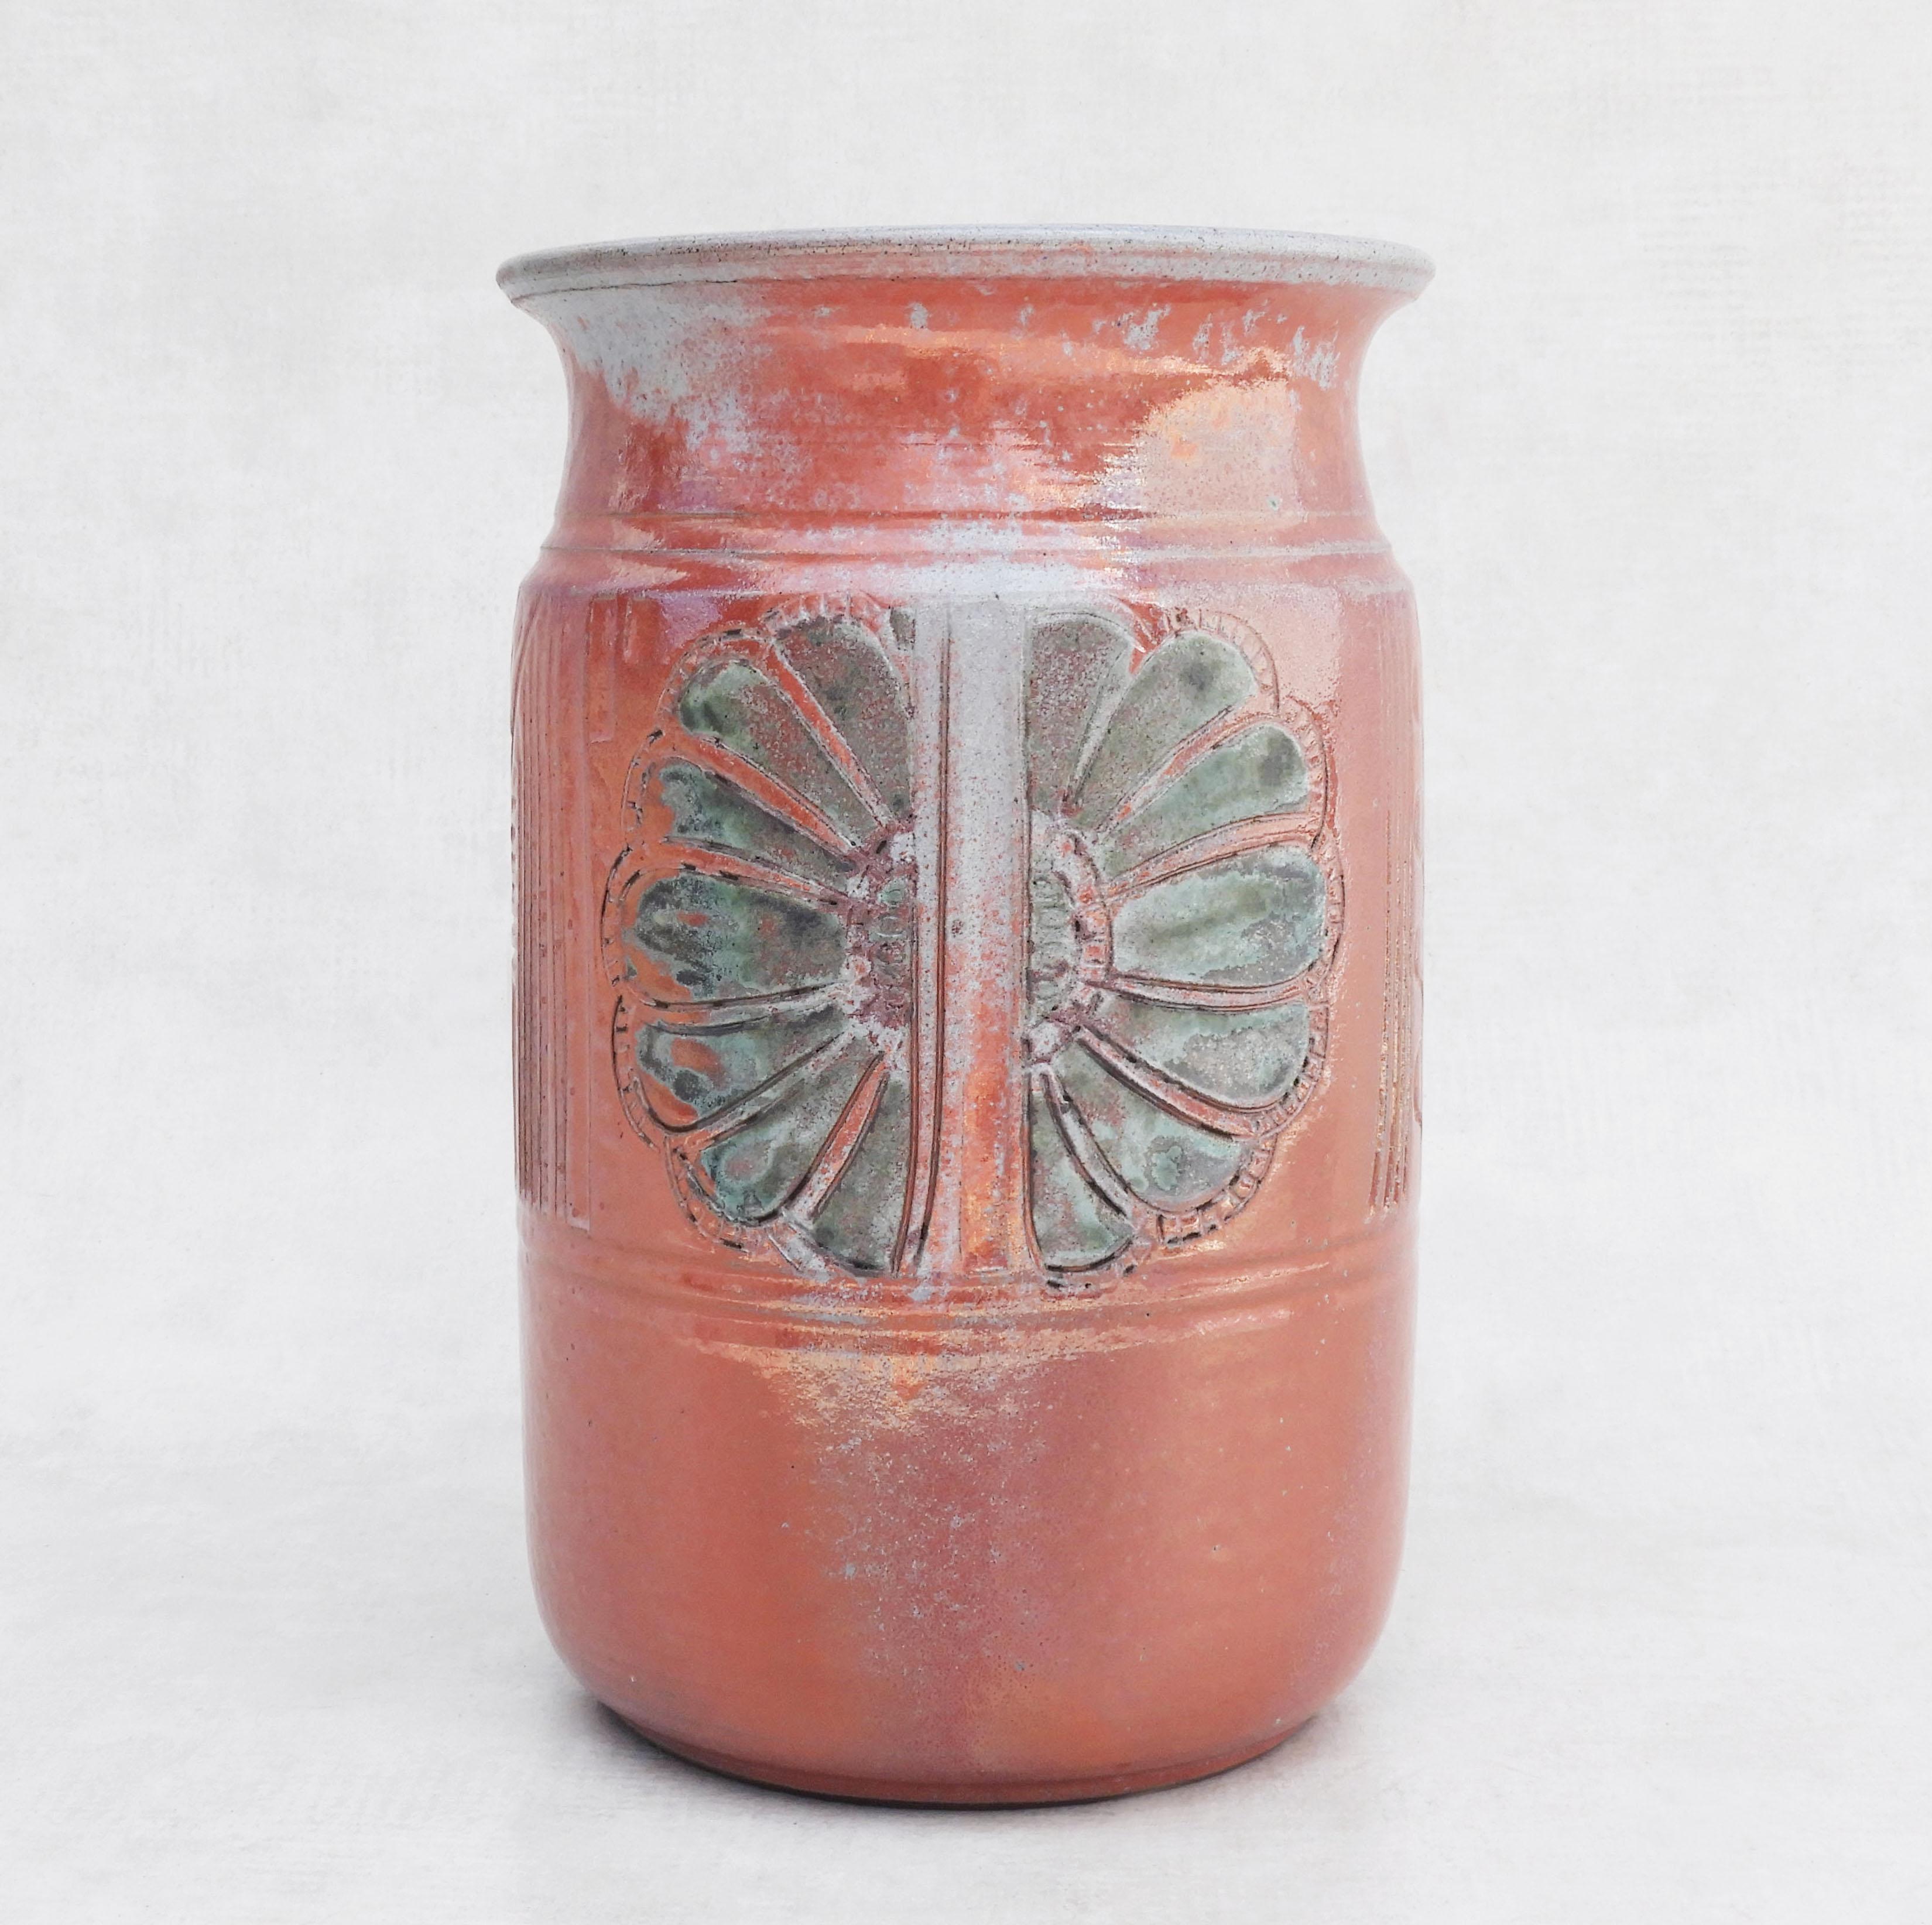 Large Vallauris ceramic vase C1980s France
Stunning stoneware vase from French ceramic Artist Edmond Guizol.
Beautiful handcrafted oversize pot decorated with a floral motif in bas-relief and a subtle dusky pink and grey/green glaze.
A gorgeous